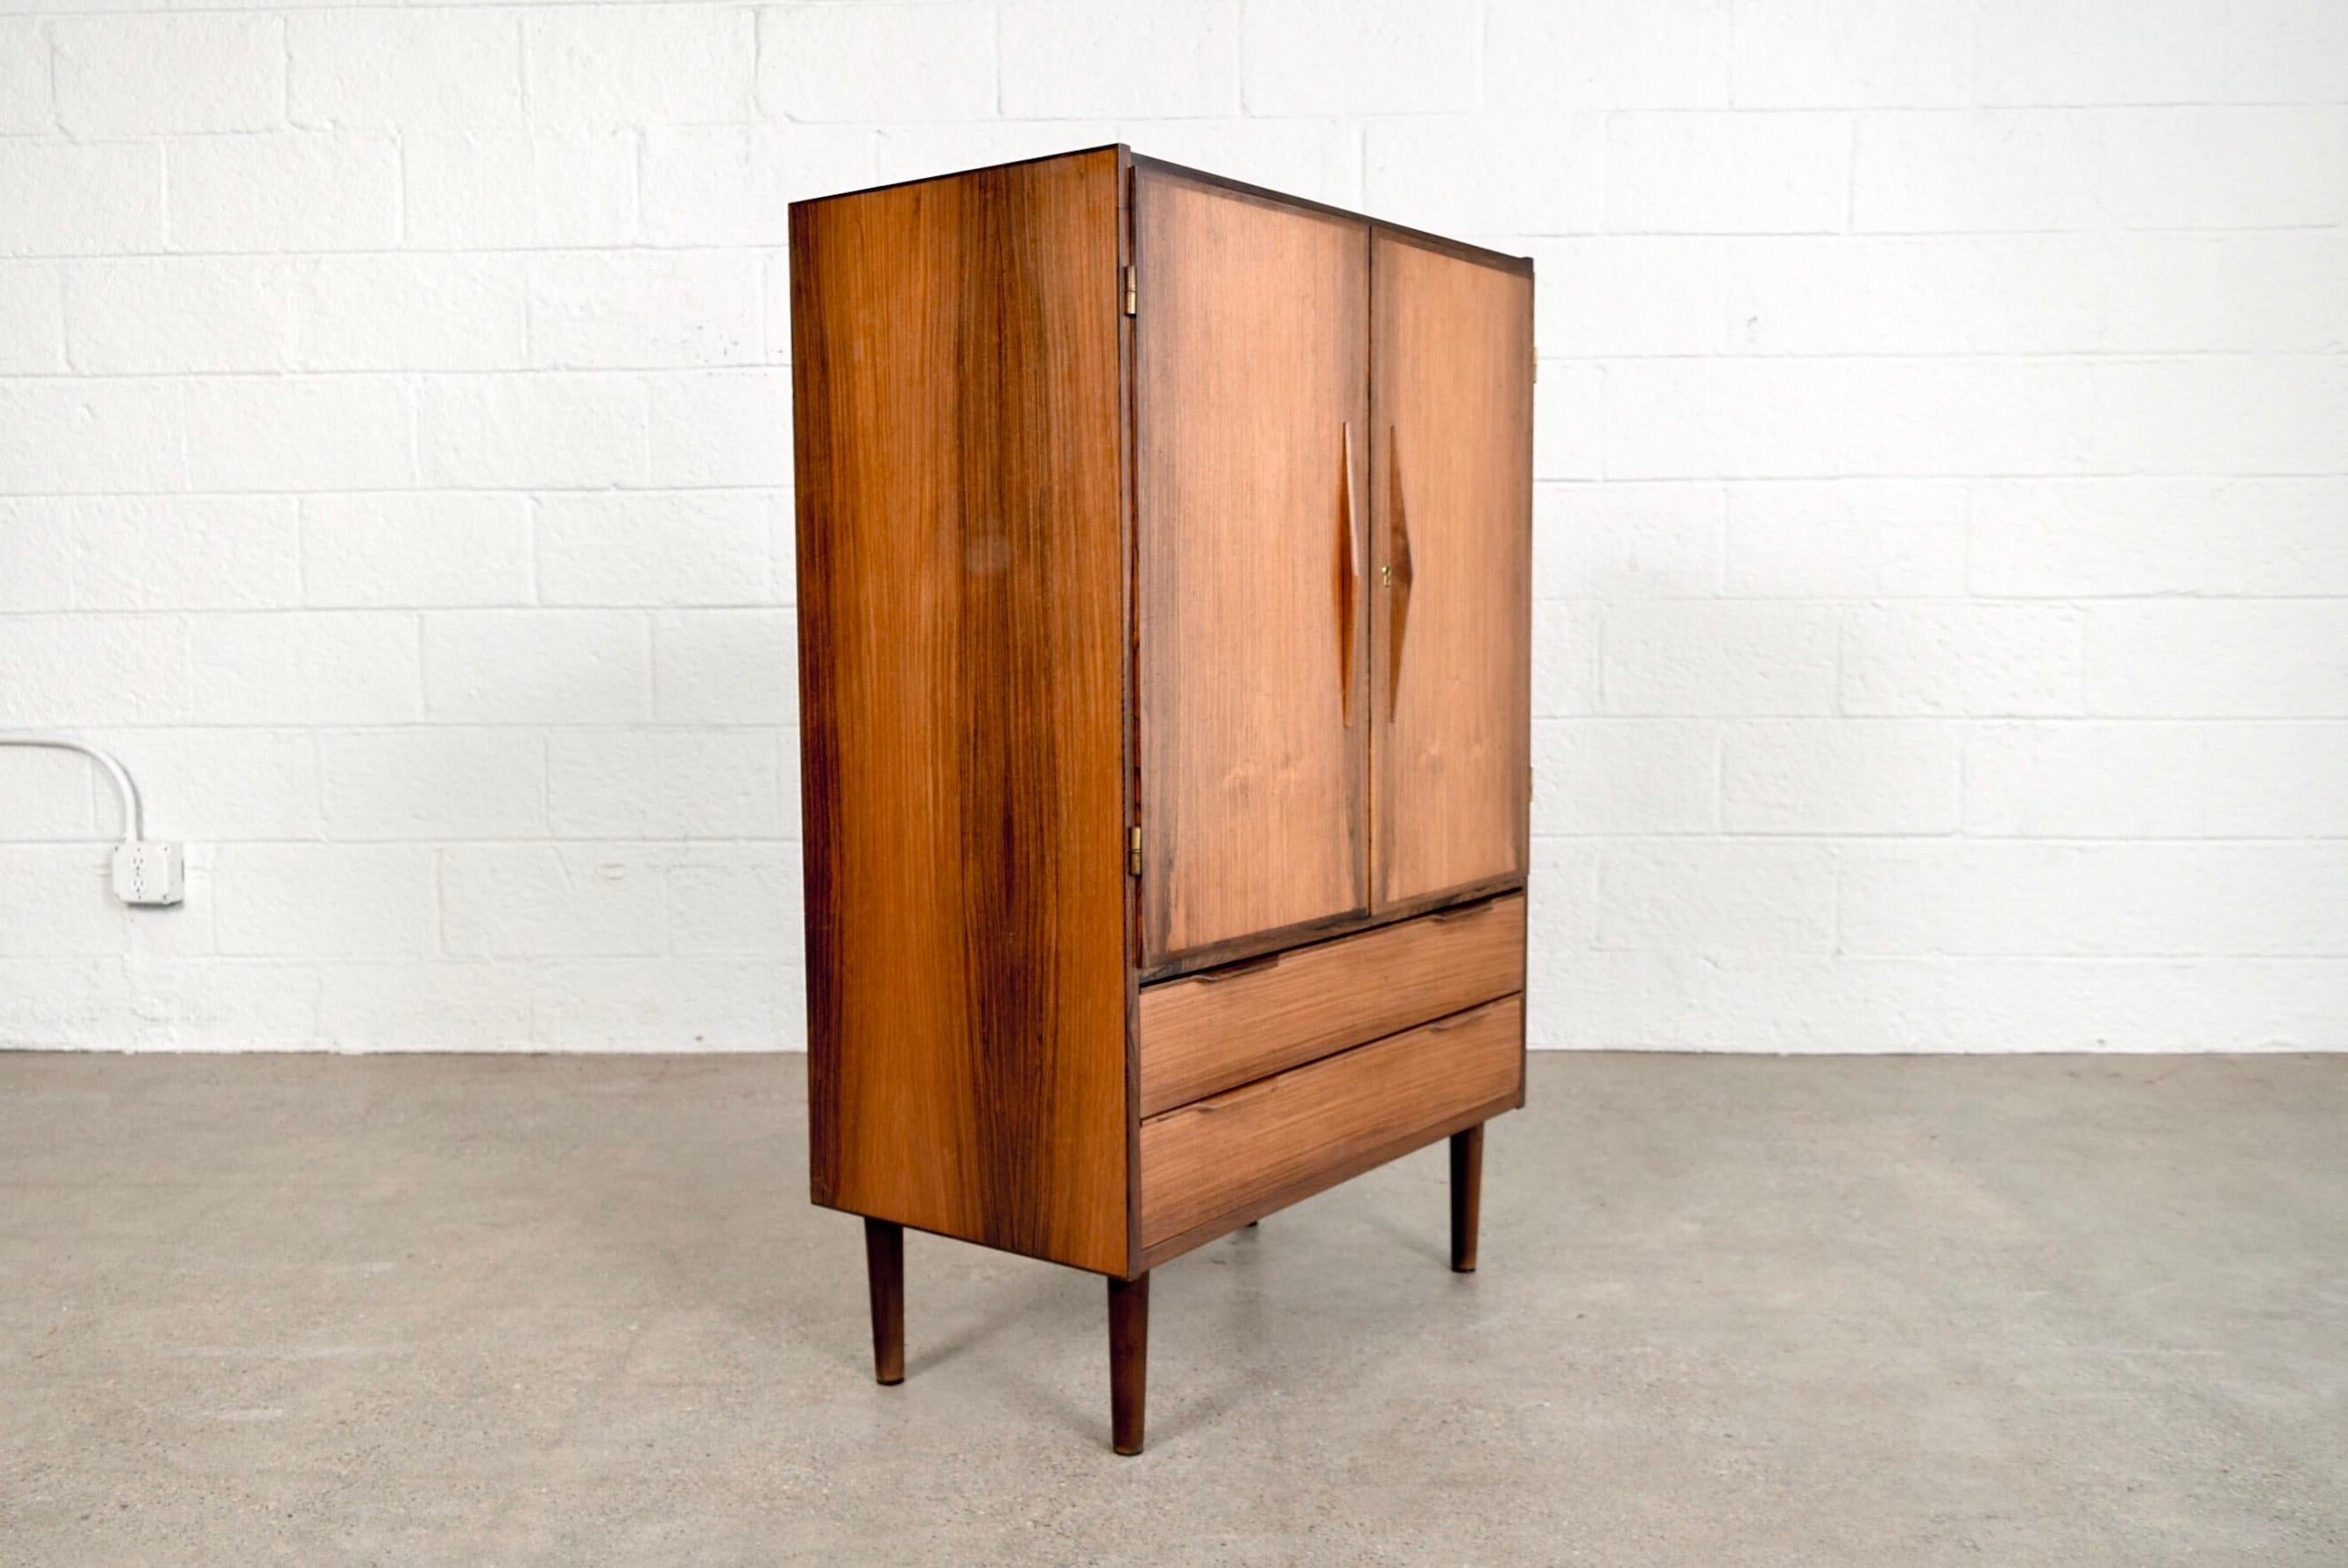 Midcentury Danish Modern Rosewood Bar Cabinet, 1960s In Good Condition For Sale In Detroit, MI